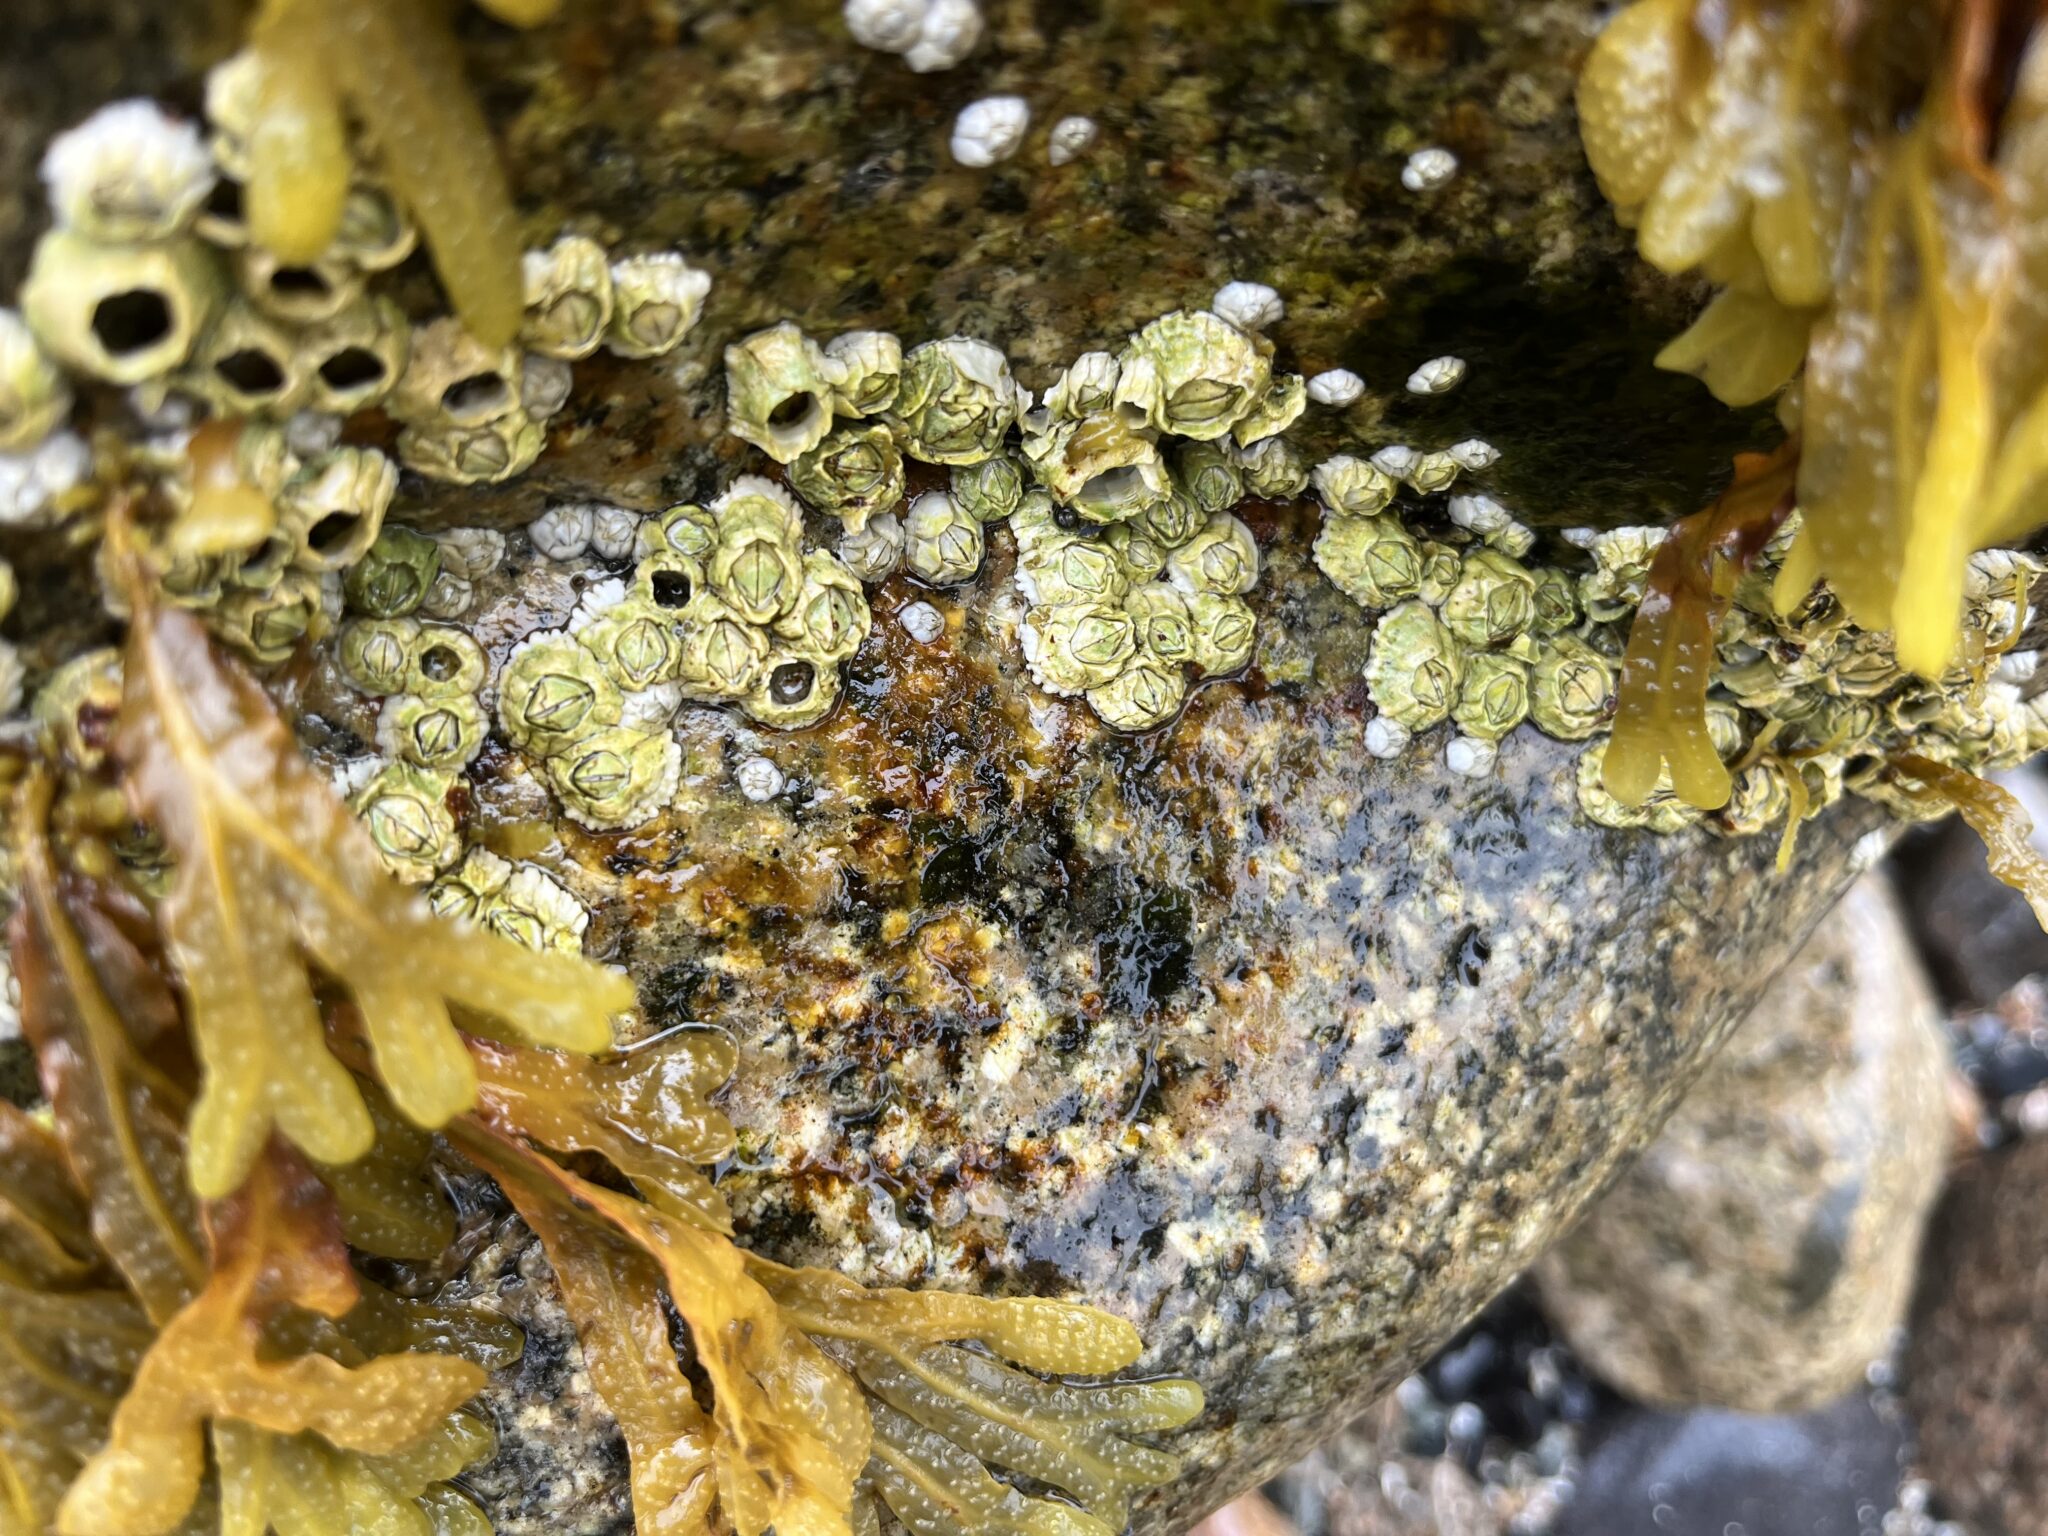 Close-up view of barnacles clinging to a rock, surrounded by rockweed.